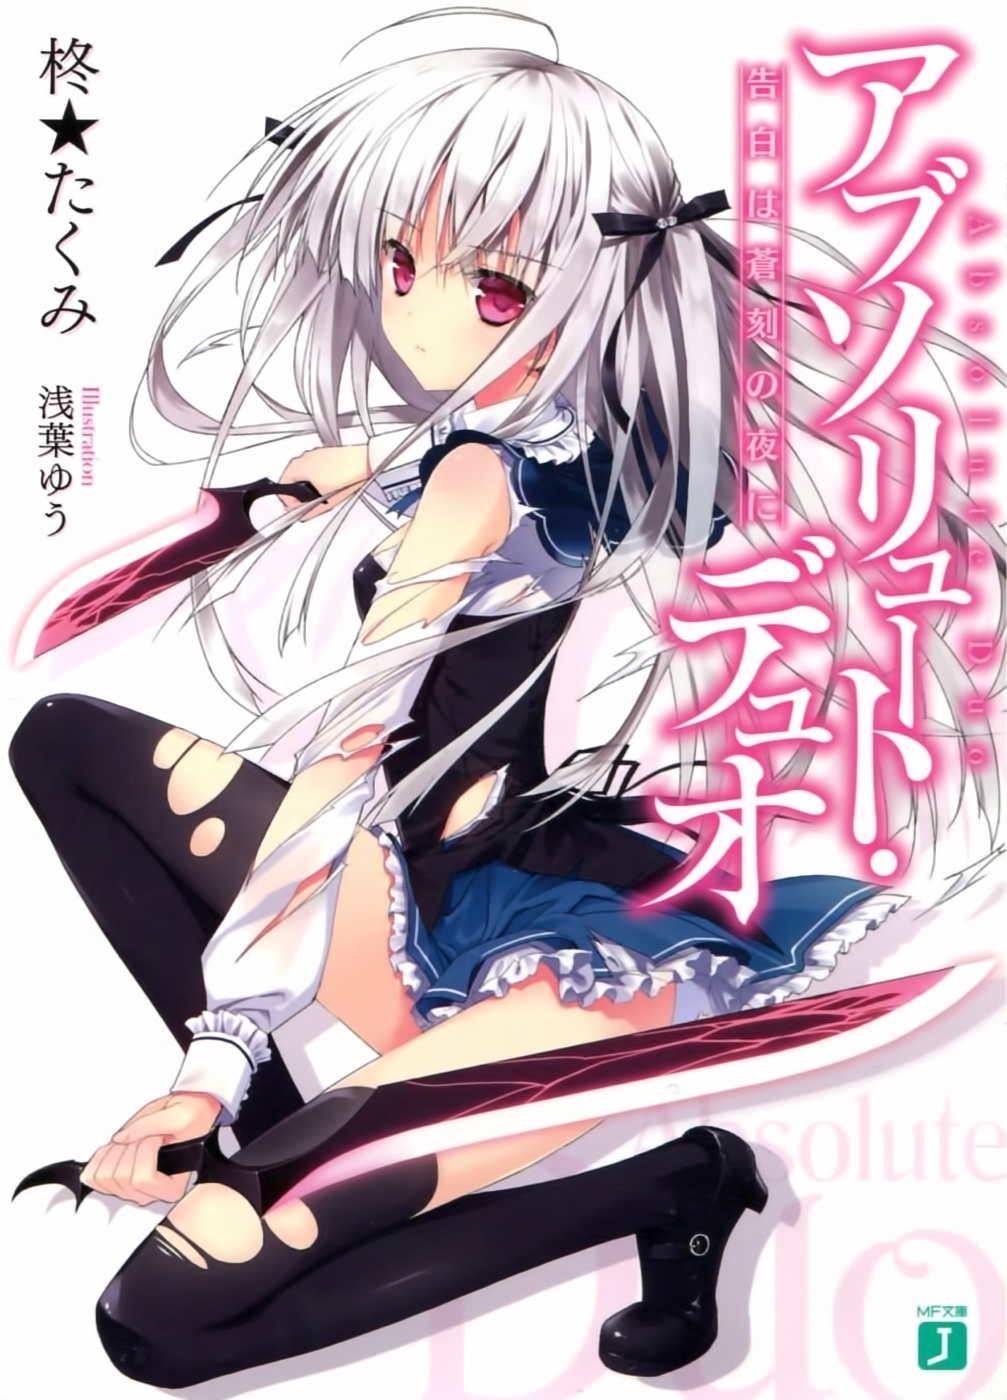 Absolute Duo 1 PDF